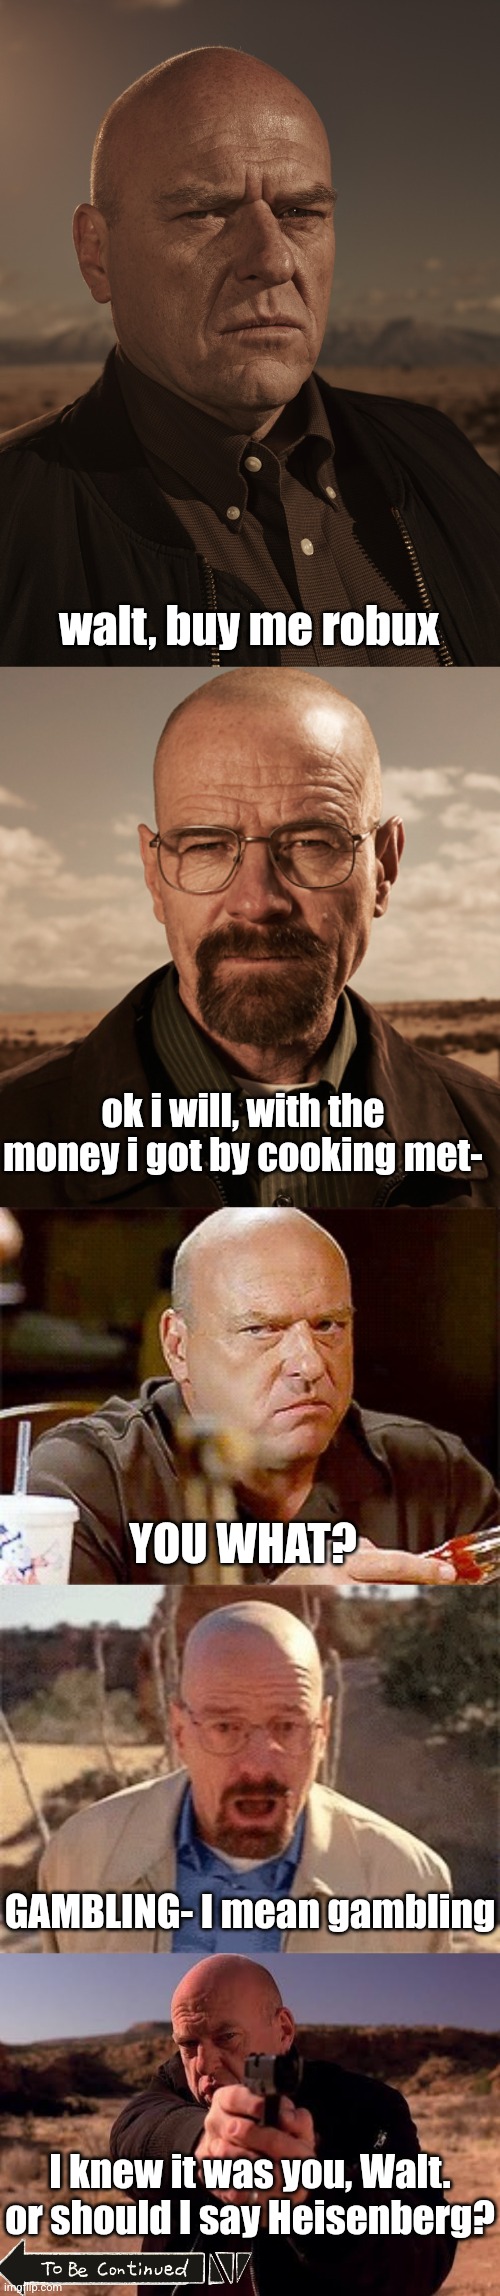 part 2 comeing suun | walt, buy me robux; ok i will, with the money i got by cooking met-; YOU WHAT? GAMBLING- I mean gambling; I knew it was you, Walt. or should I say Heisenberg? | image tagged in hank schrader - breaking bad - dean norris,walter white,hank schrader glare breaking bad | made w/ Imgflip meme maker